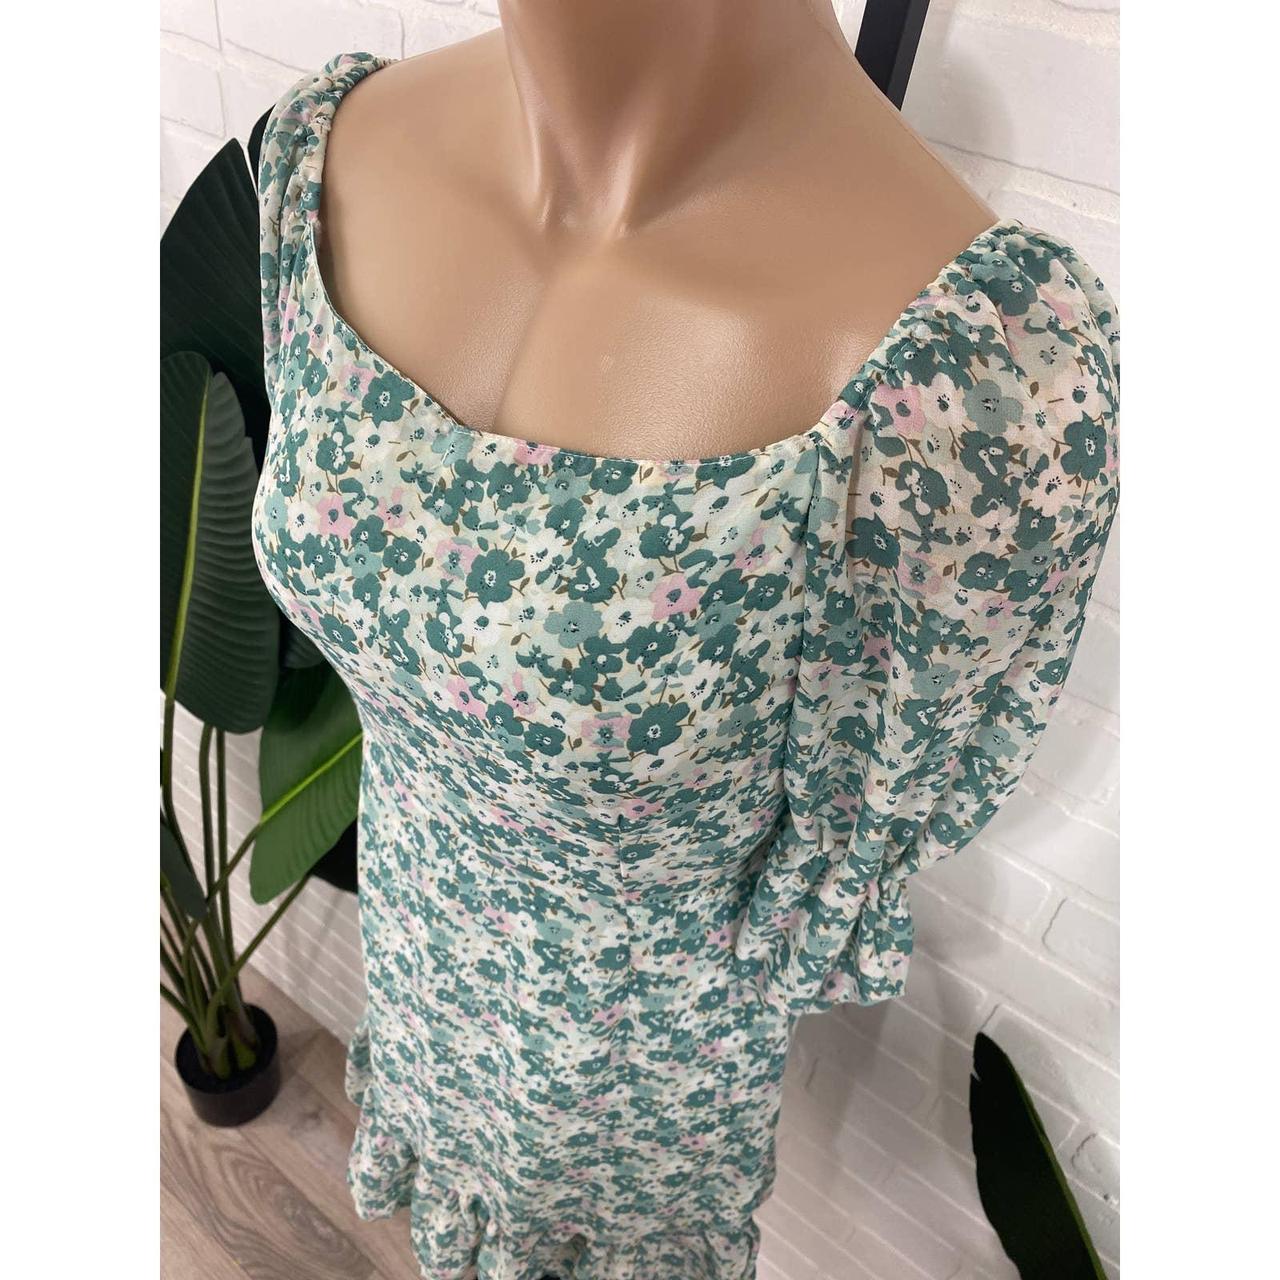 Product Image 3 - No Paypal

Floral green sundress. Can